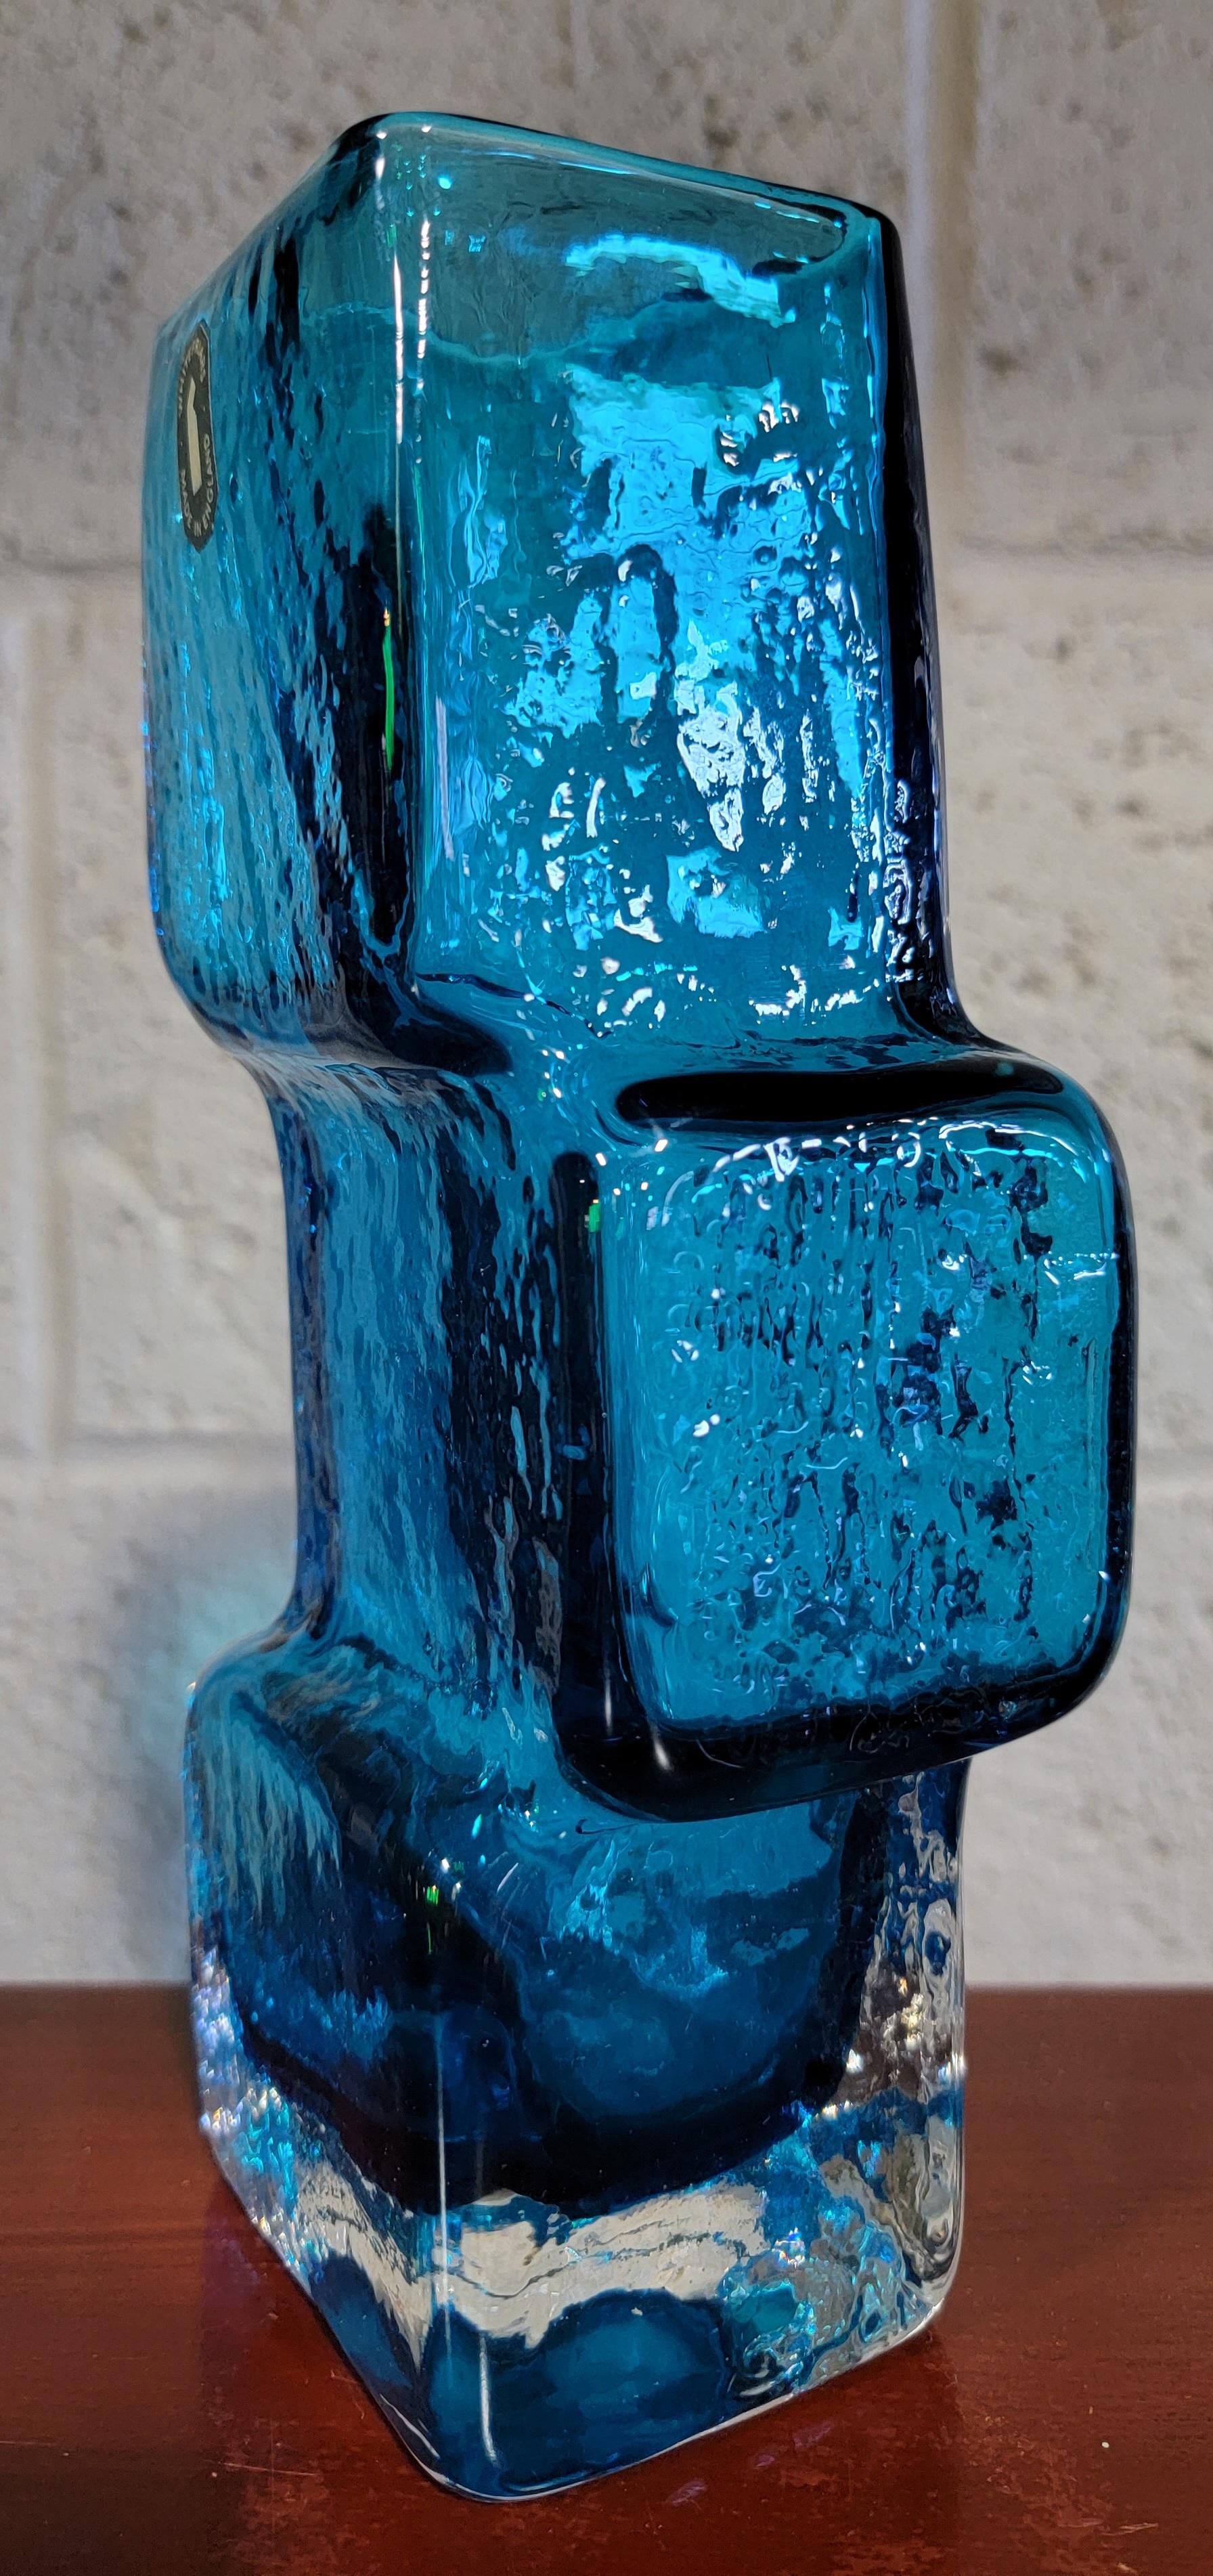 Cubism style blown glass vase designed by Geoffrey Baxter for Whitefriars. Titled 